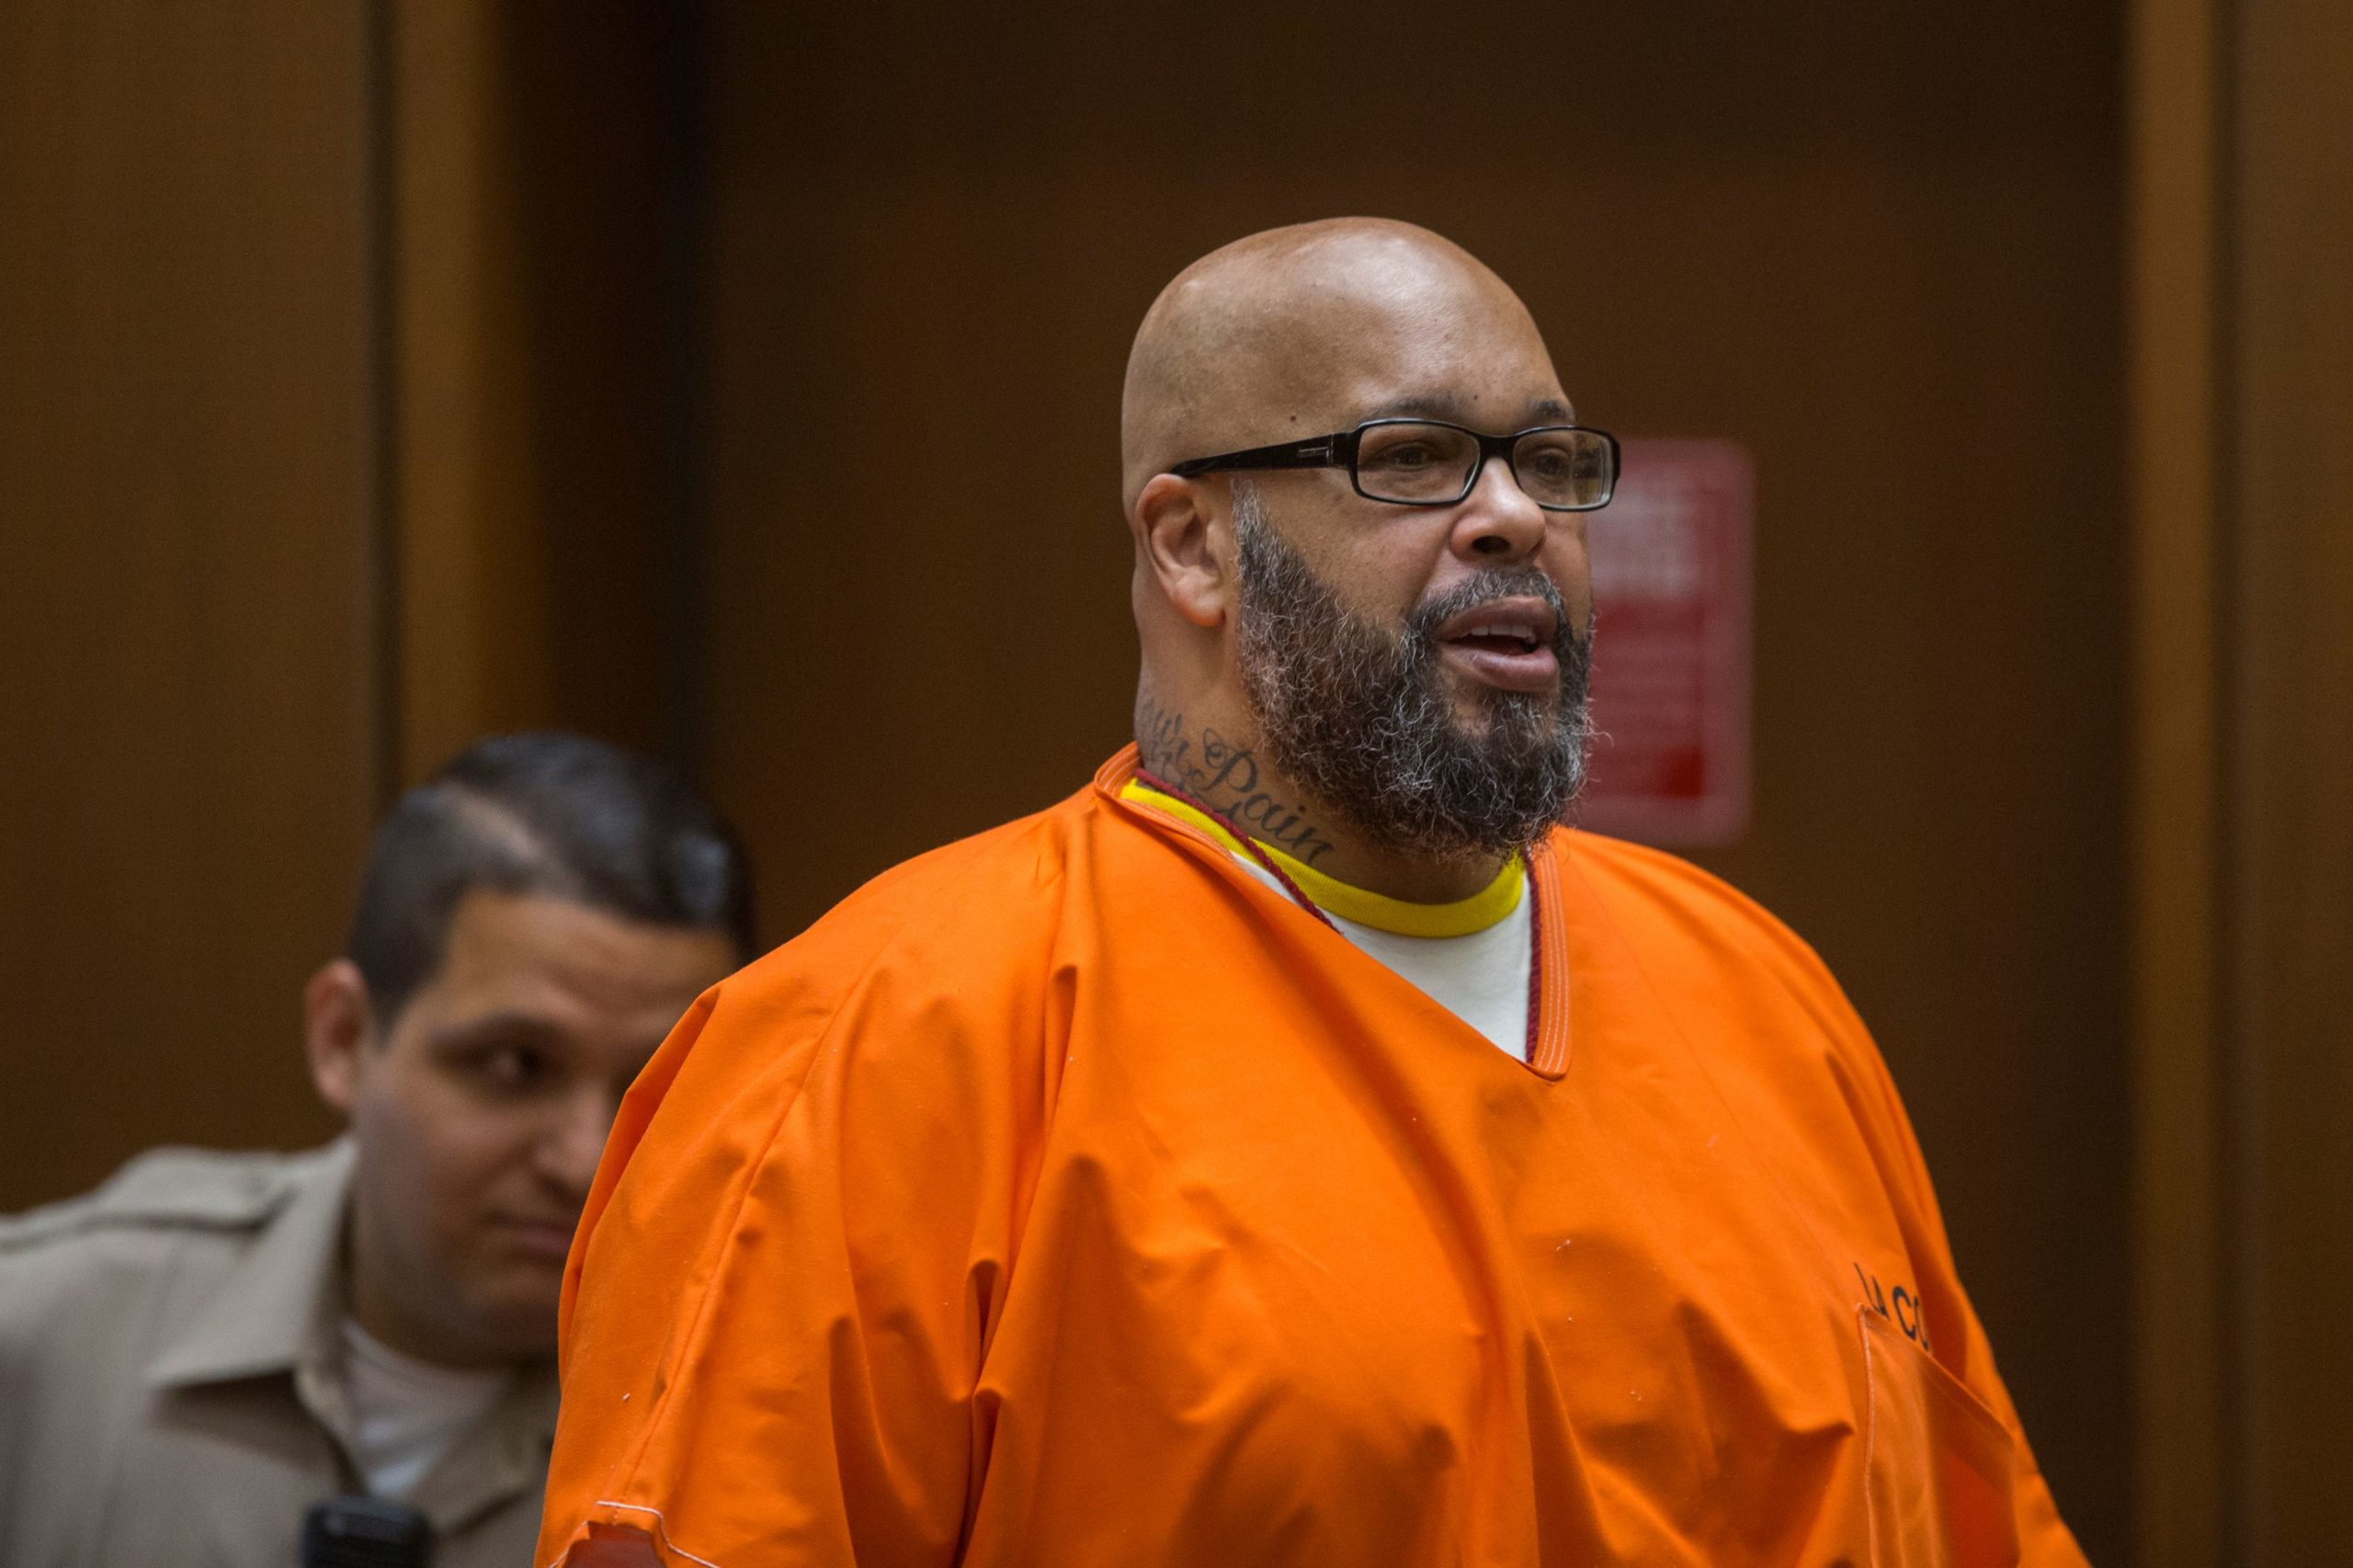 Suge Knight Sells His ‘Life Rights’ to Producer to Make New Biopic